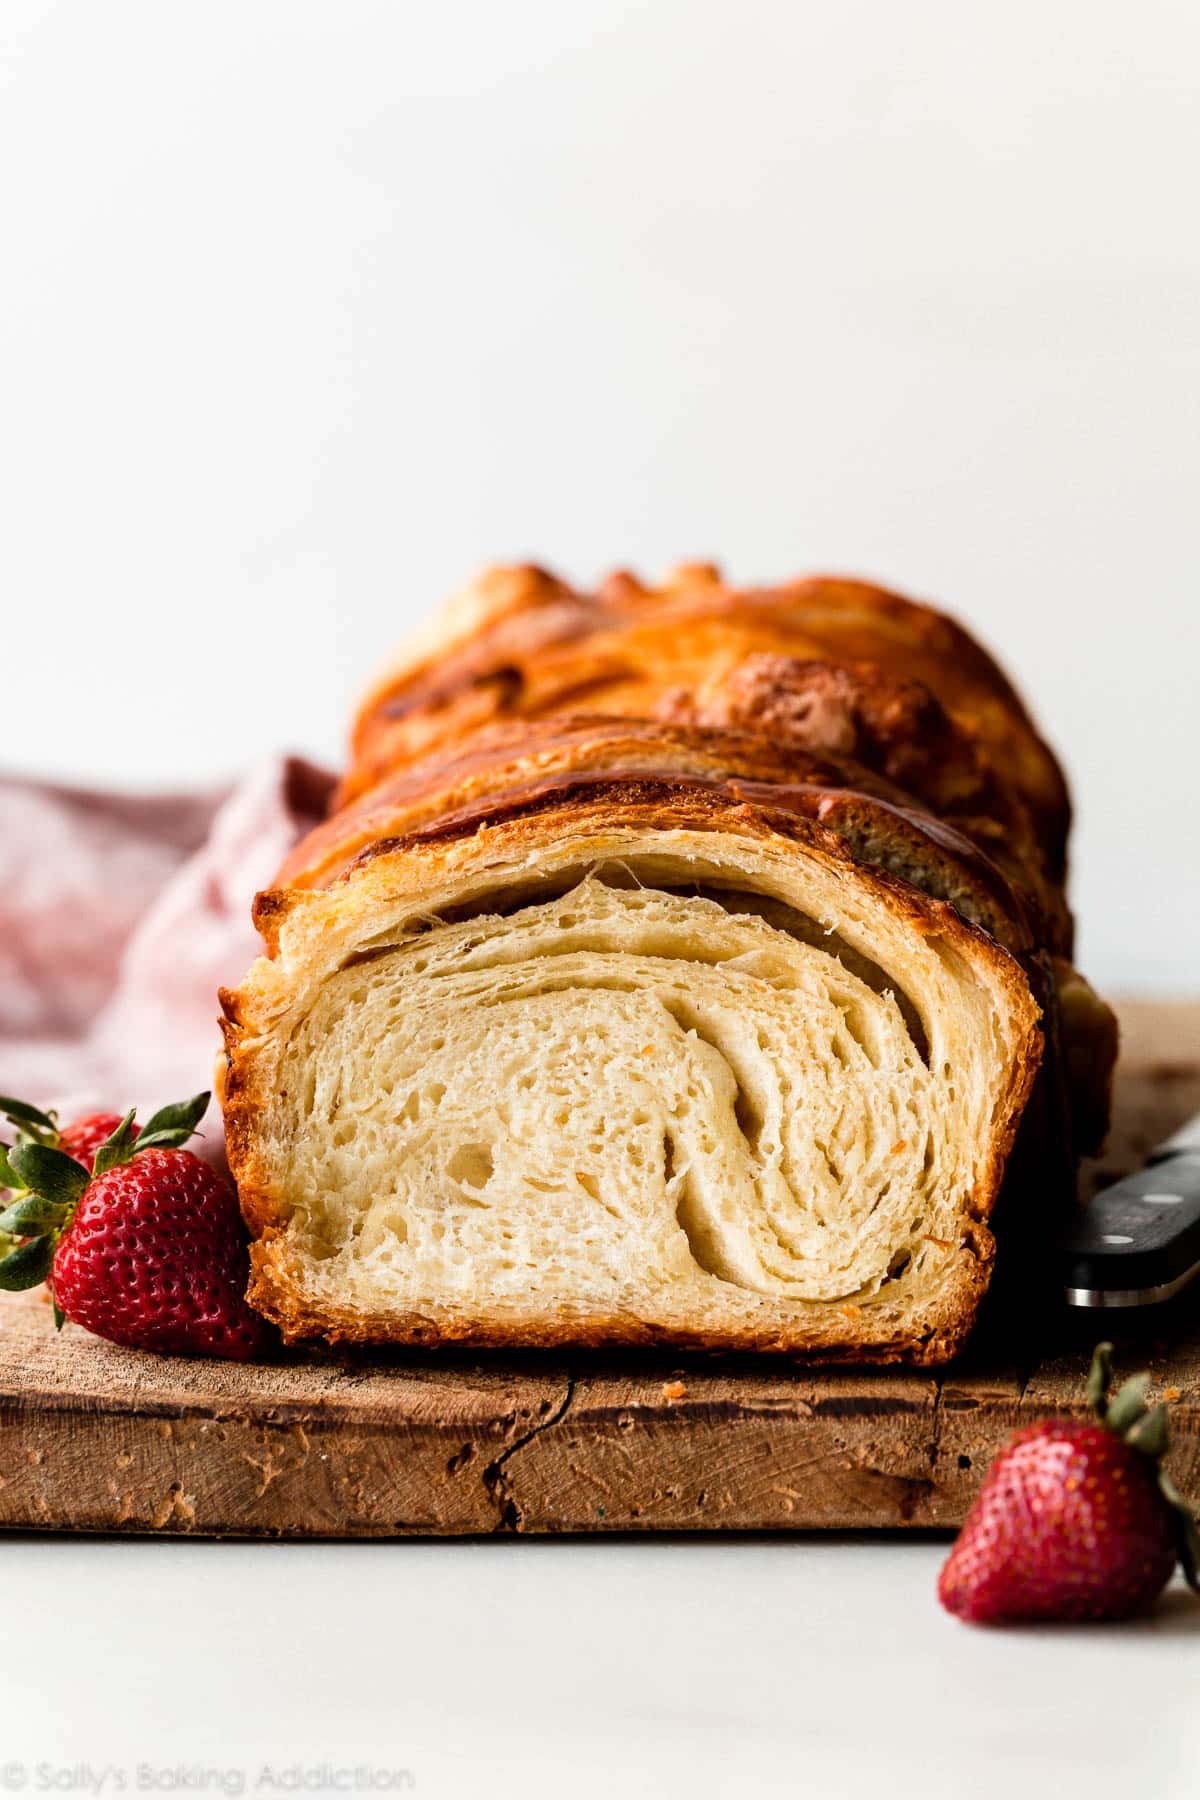 sliced croissant loaf on wooden cutting board with strawberries placed next to it